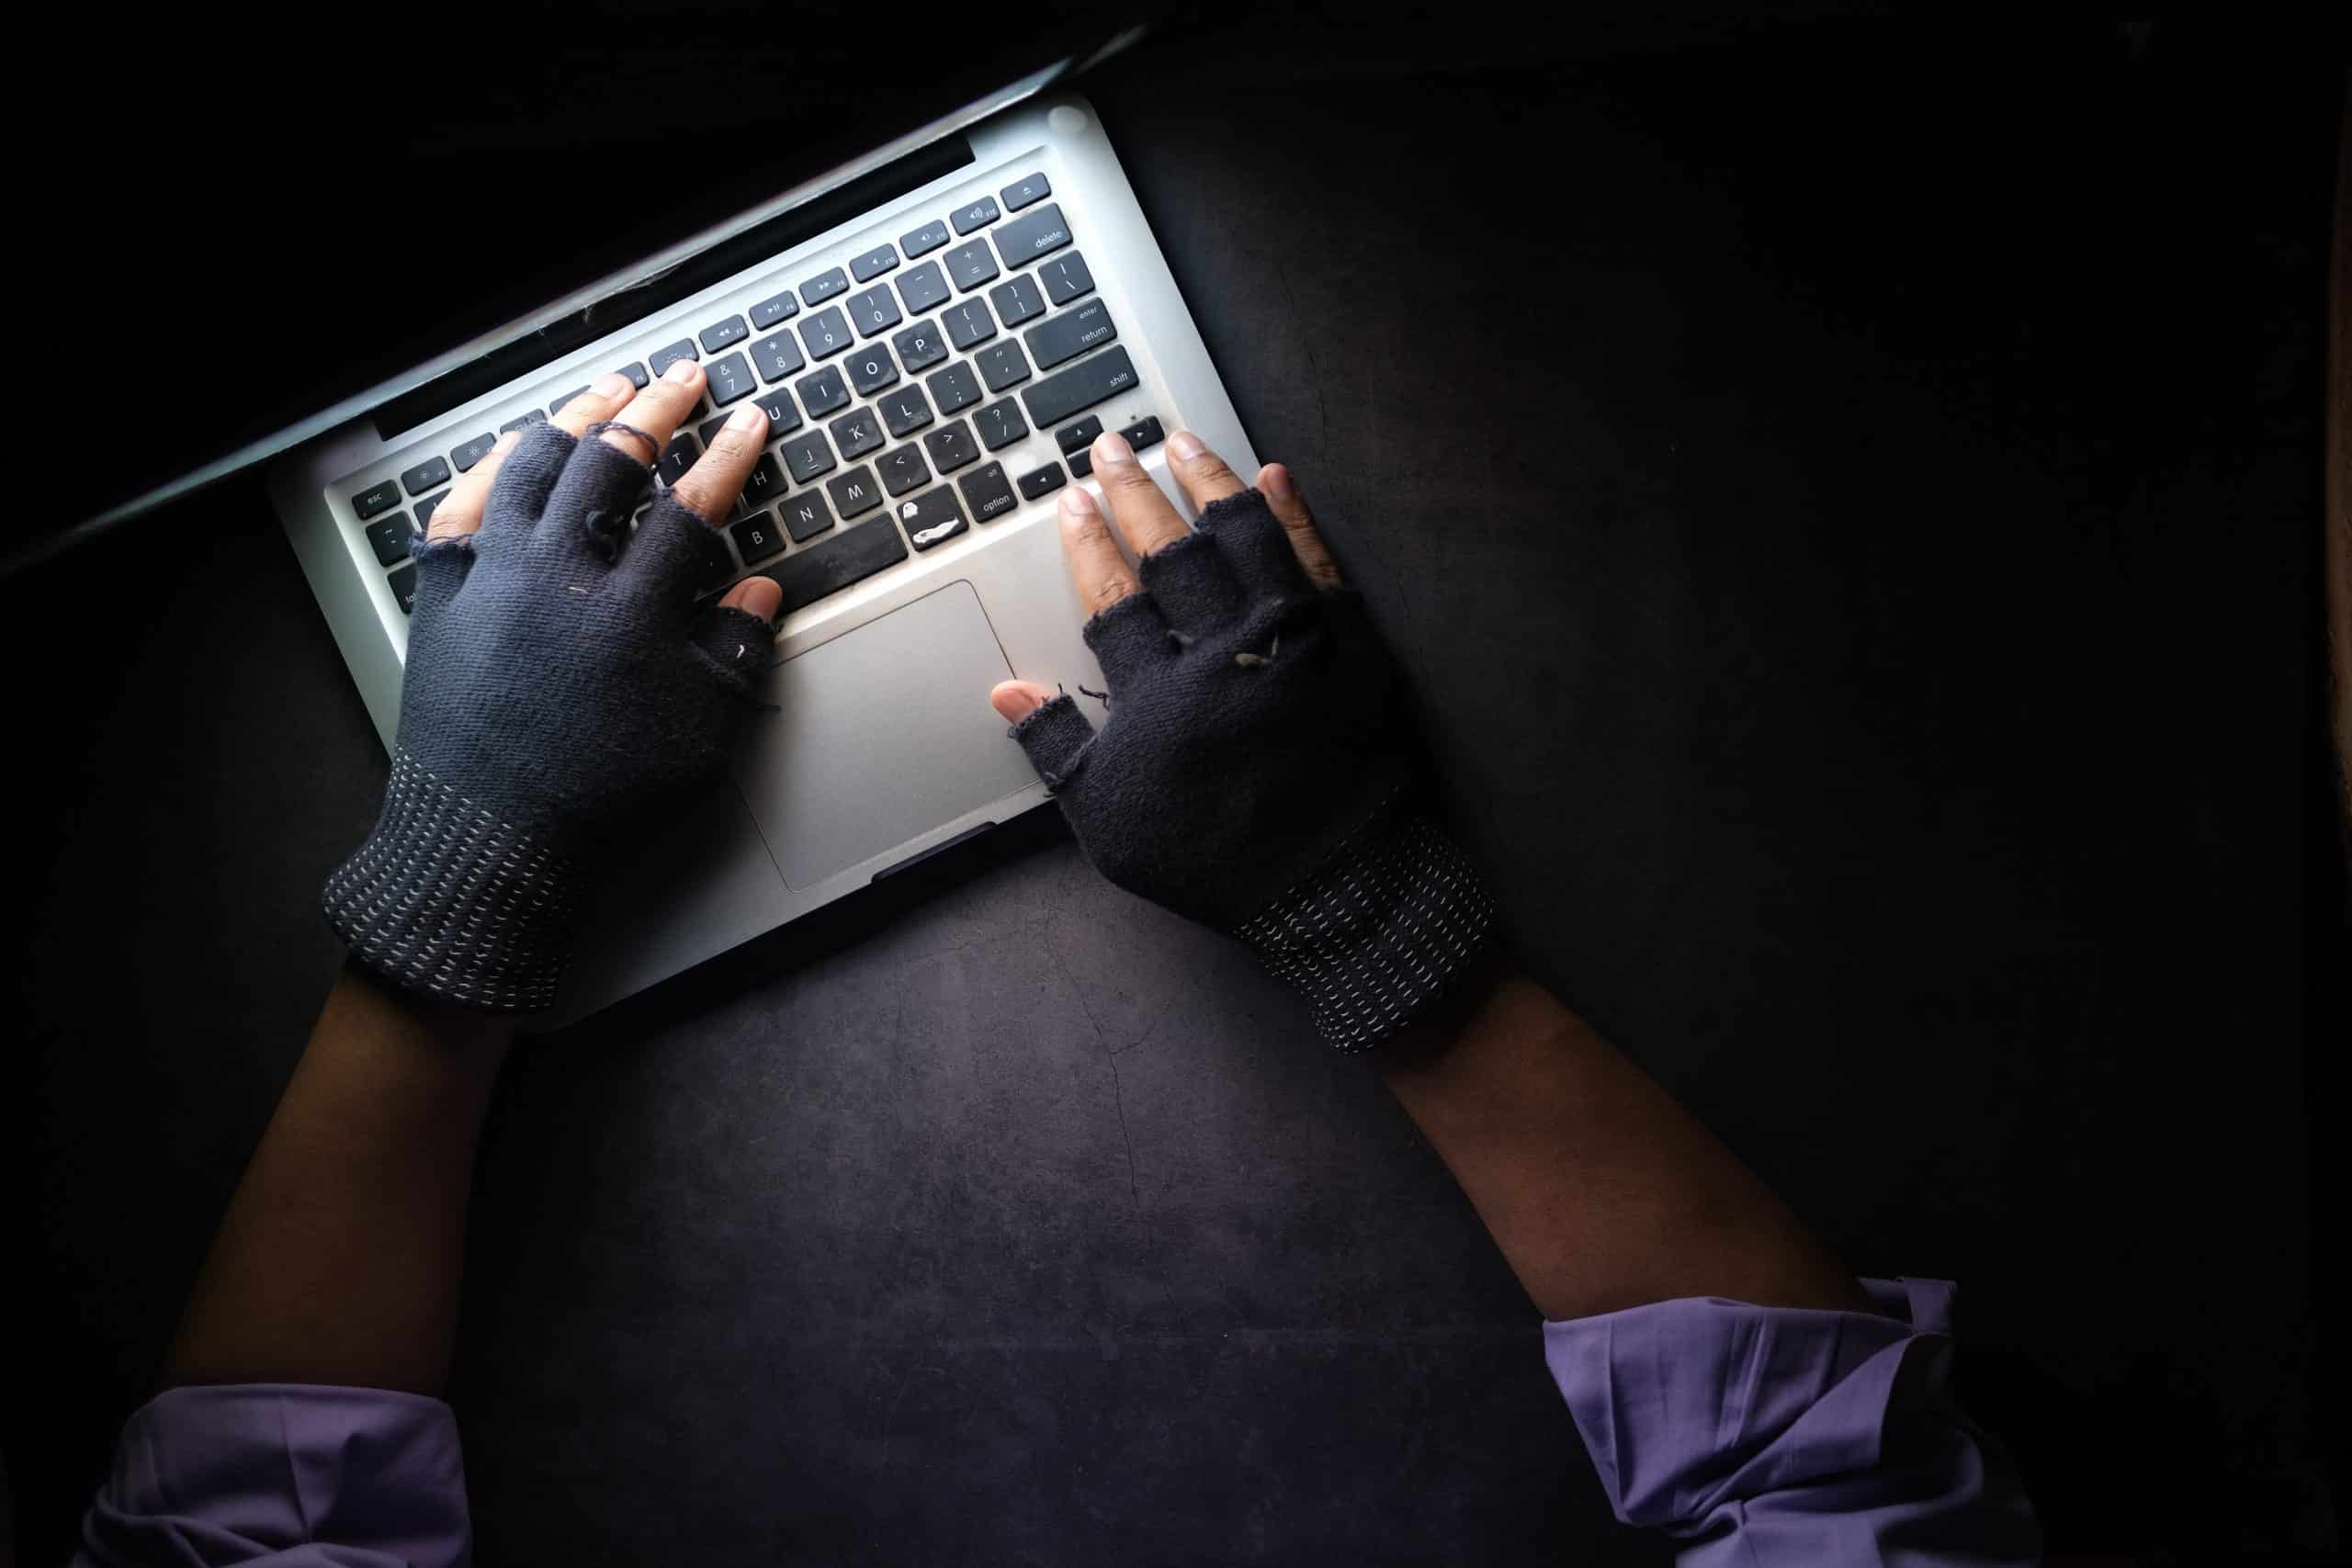 a person wearing gloves typing on a laptop